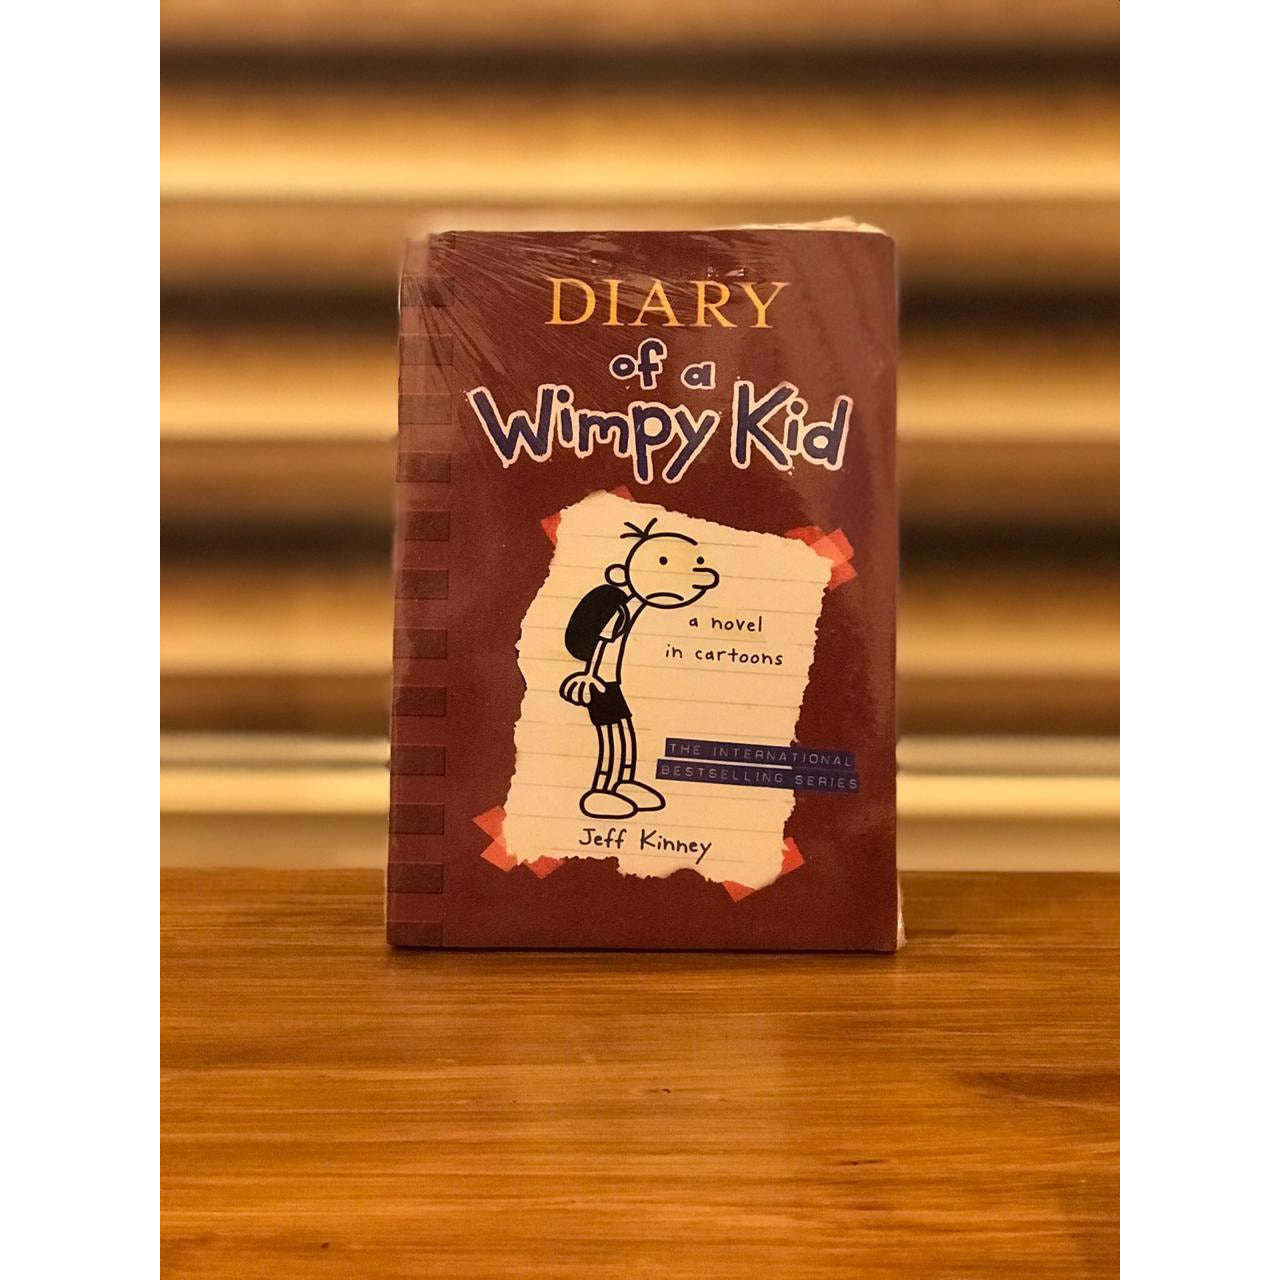 Diary of A wimpy Kid A Novel In Cartoons